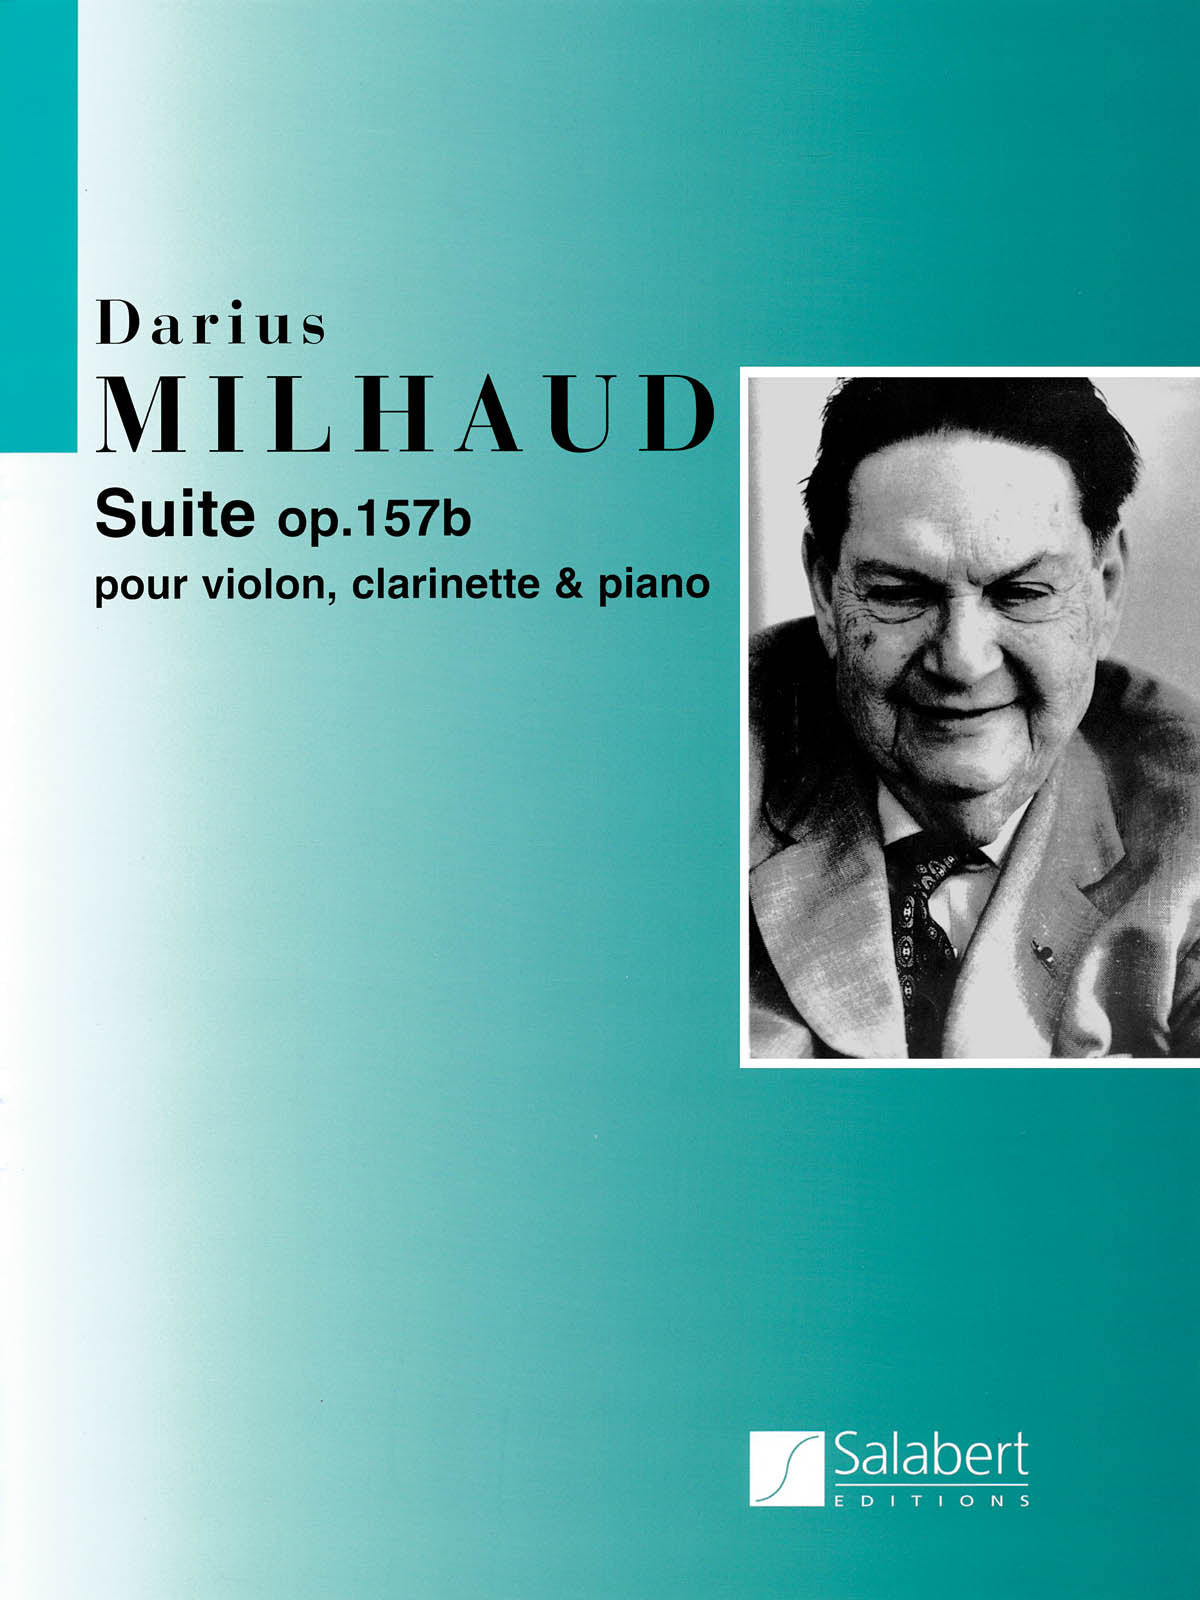 Milhaud: Suite for Violin, Clarinet and Piano, Op. 157b